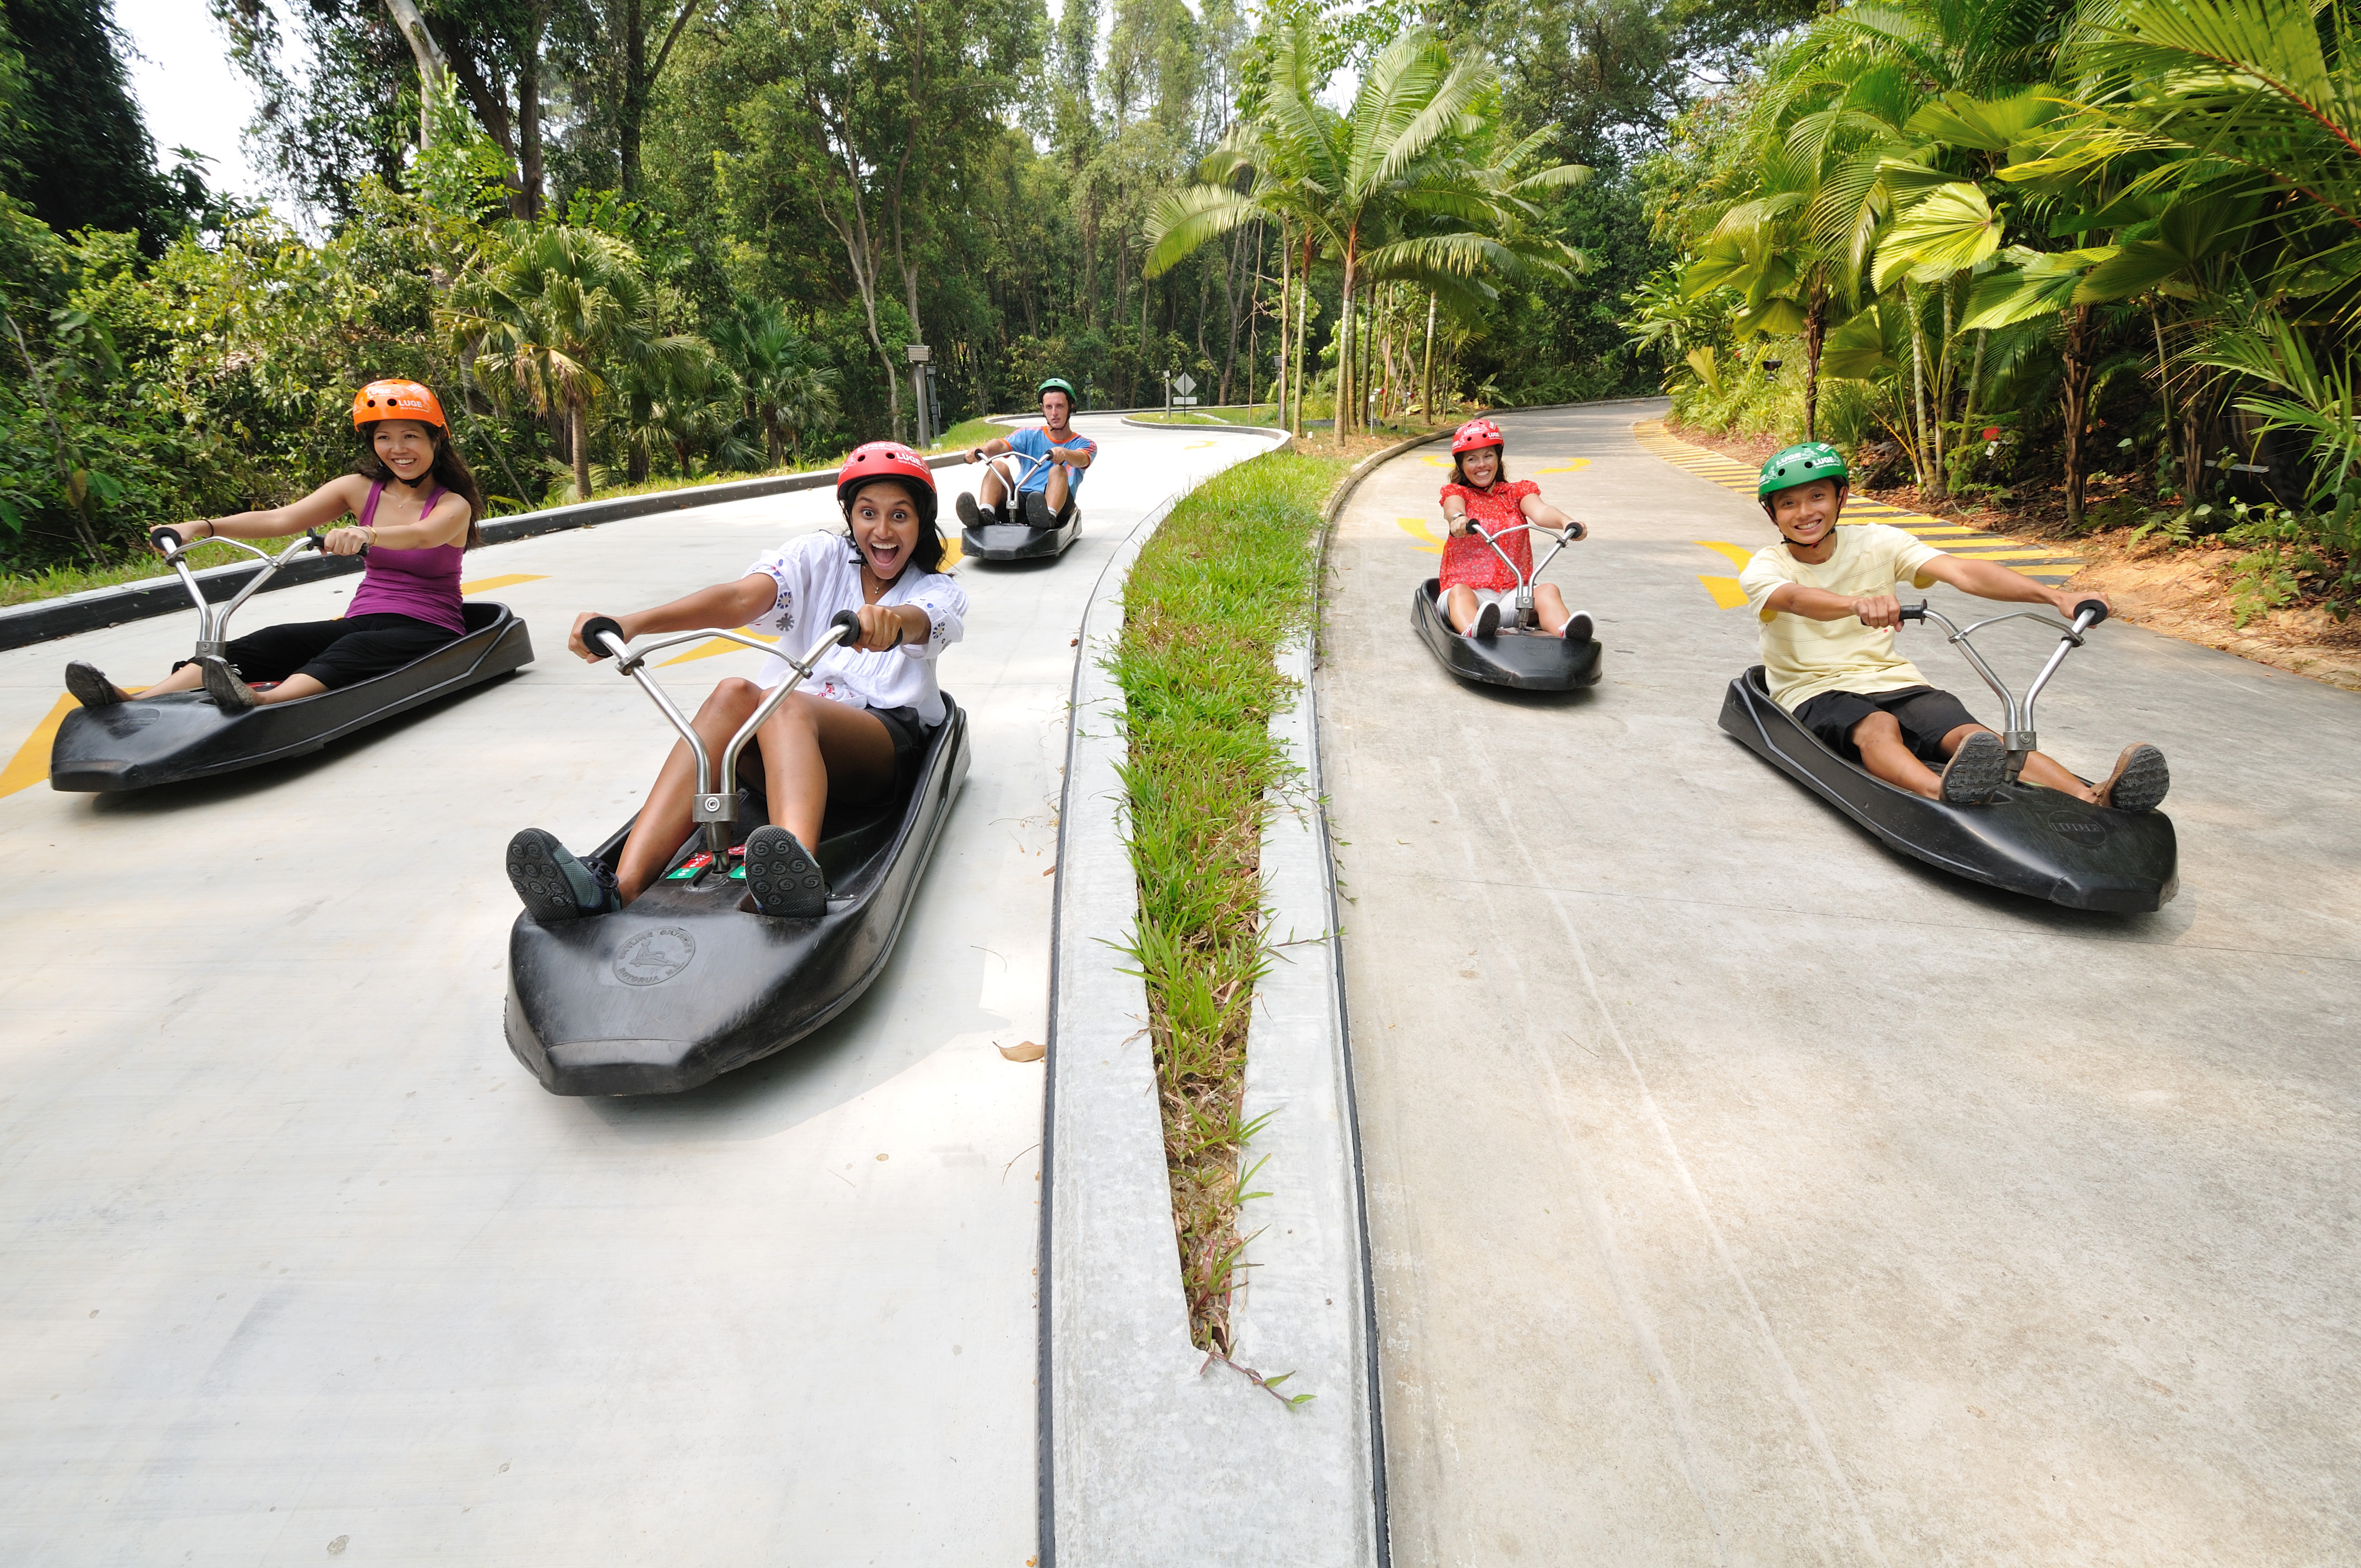 Skyline Enterprise’s luge at Sentosa in Singapore   provides 1.2million luge rides every year....